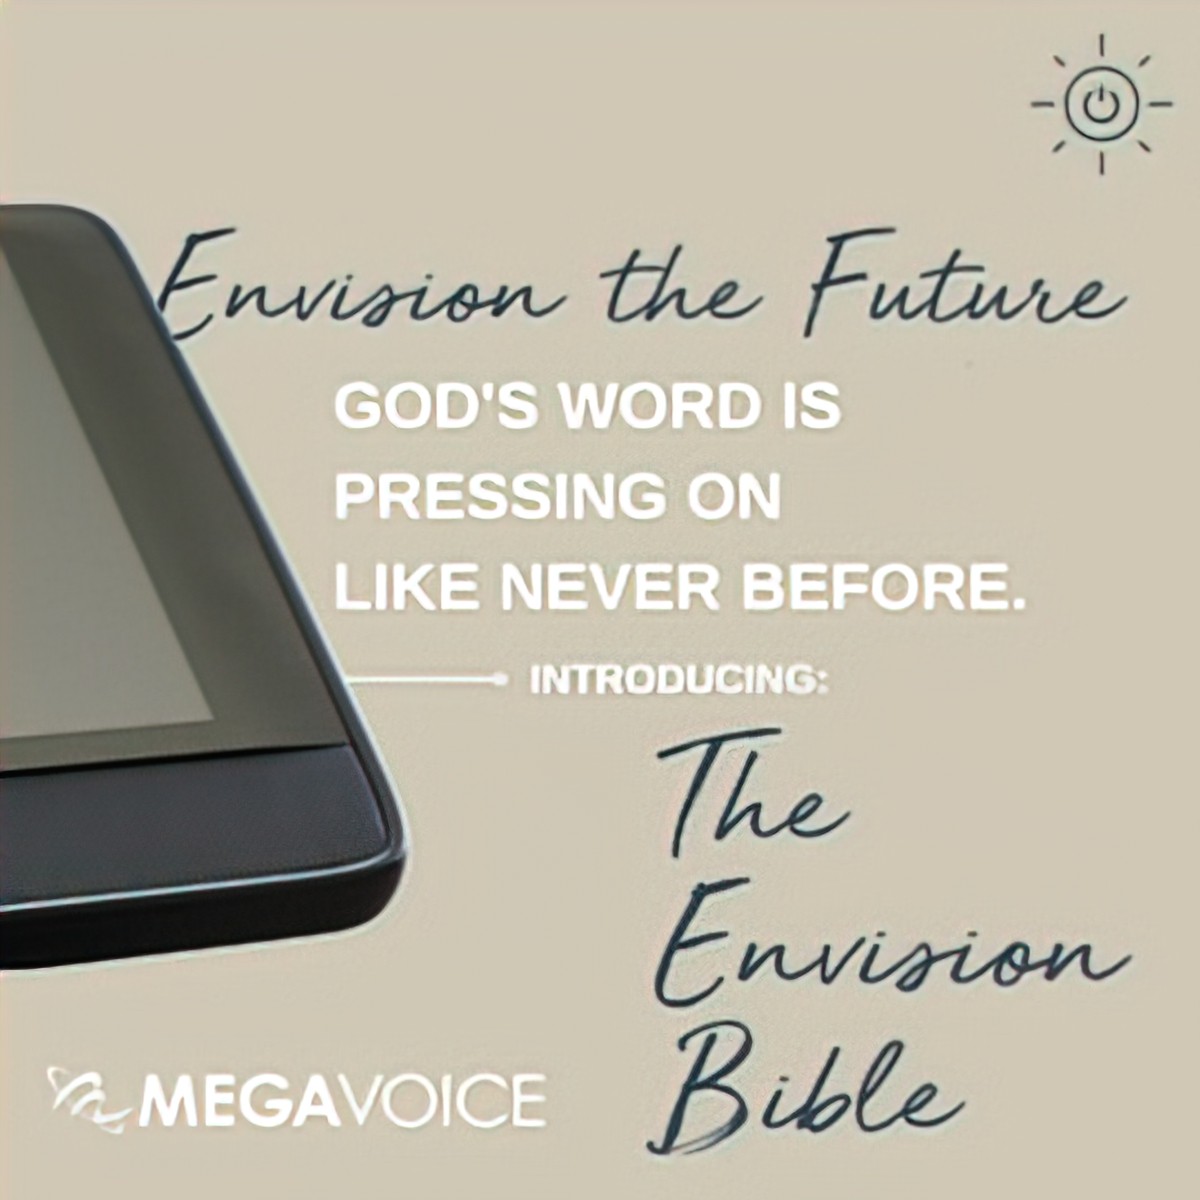 MegaVoice released the Envision Bible, a tablet for visual learners, the deaf, and the hearing impaired so they can experience the Bible.